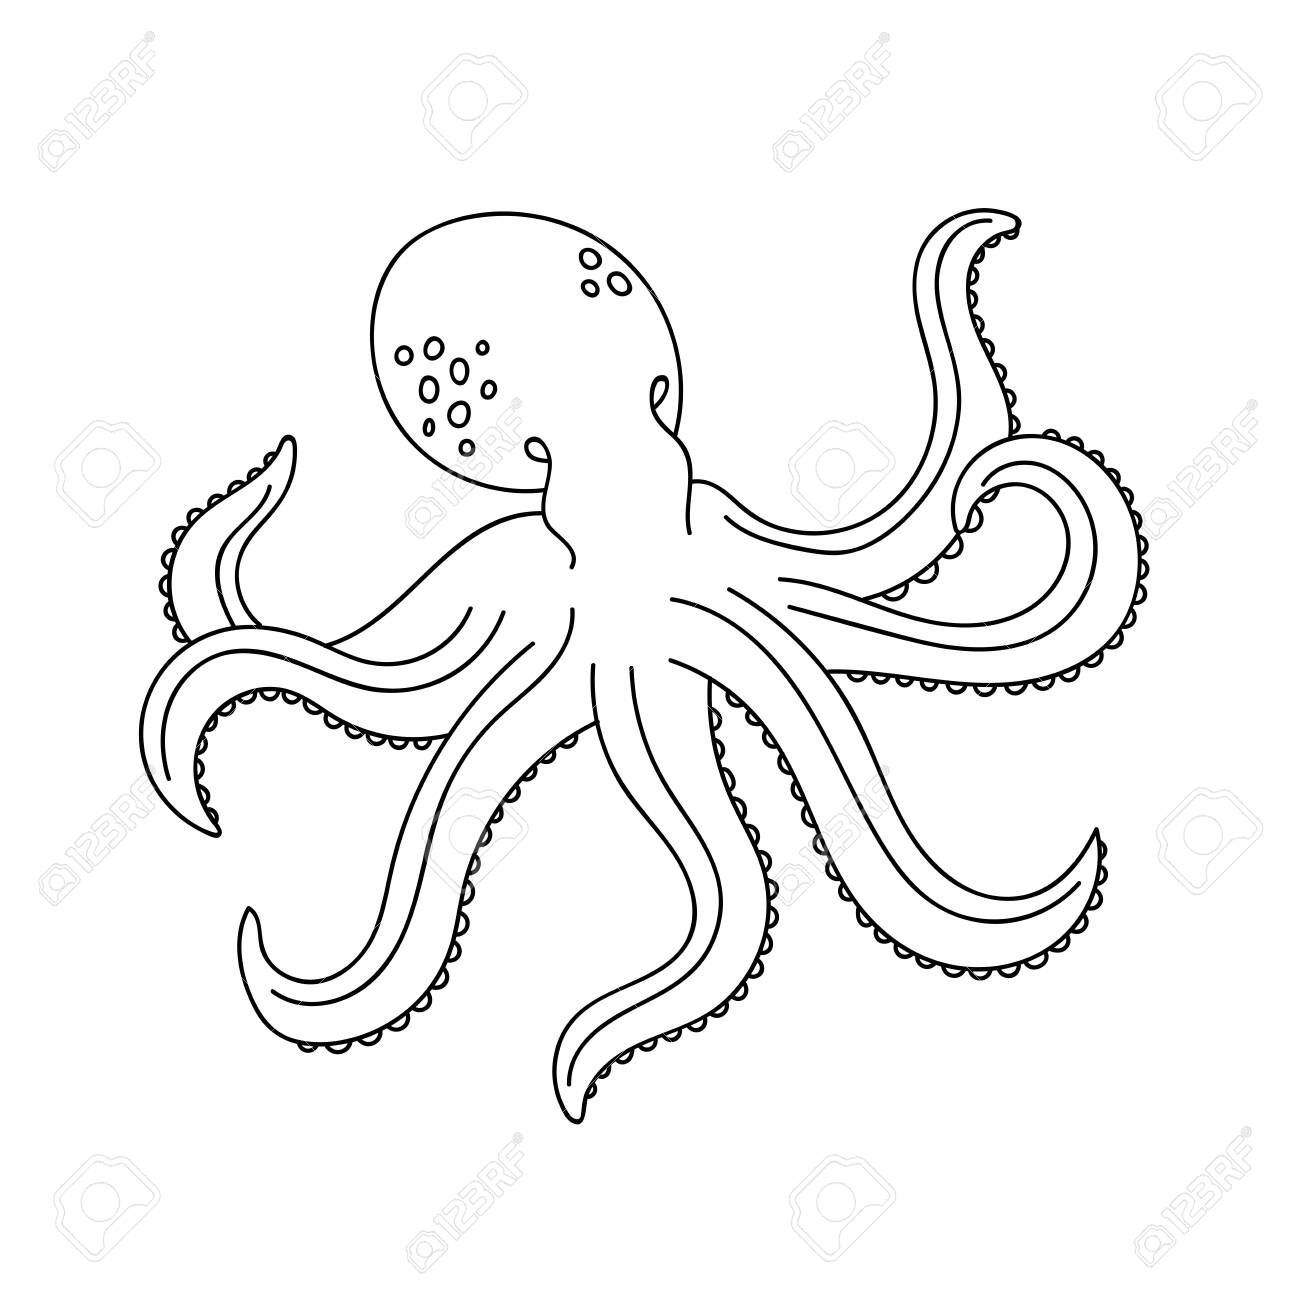 Doodle octopus for coloringsea animals for children s coloring pageshand drawn vector illustration isolated on white background royalty free svg cliparts vectors and stock illustration image